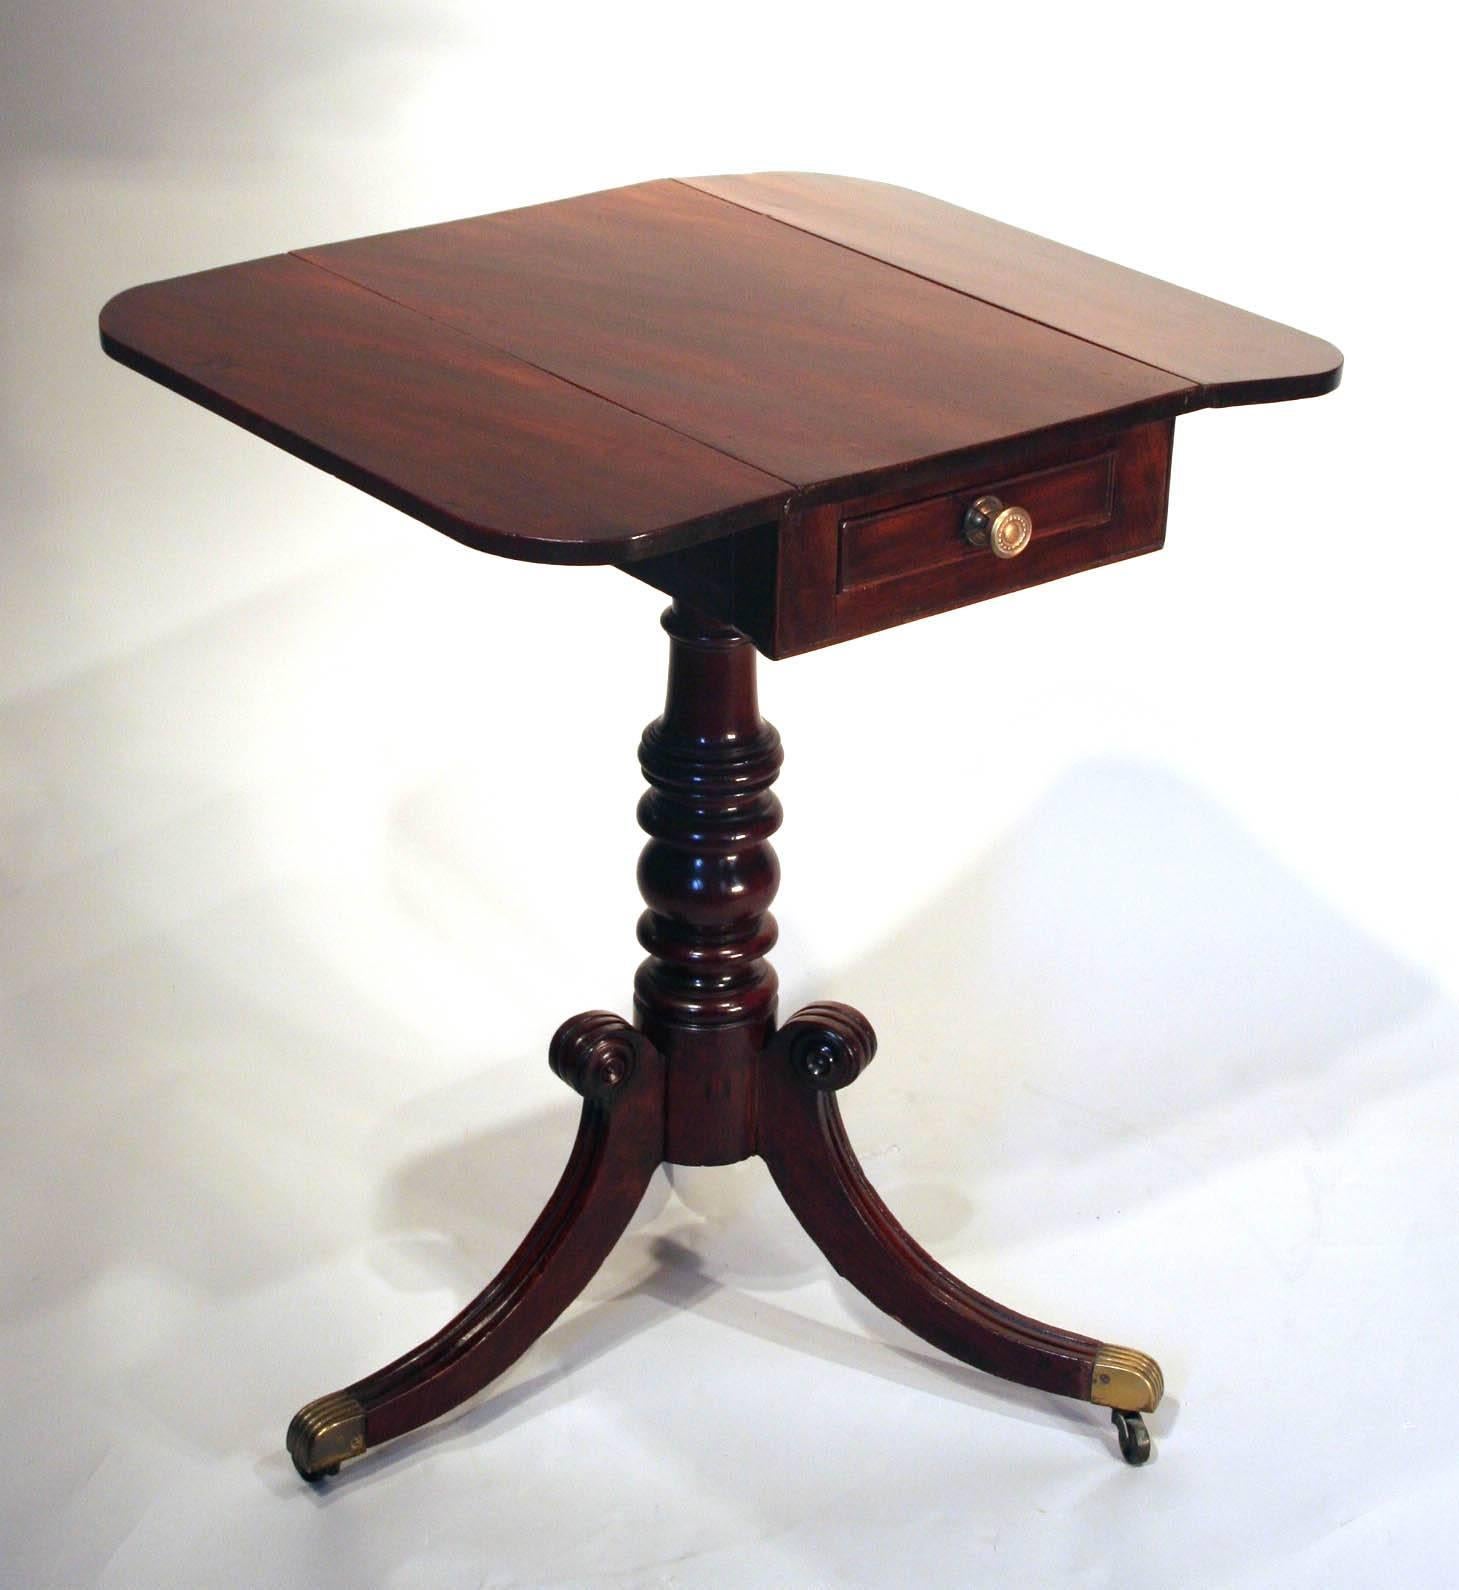 
Fine English Regency Drop-leaf Work Table in mahogany, having a single drawer above a turned pillar and three downswept fluted legs with brass castors. 
Circa 1810-1820
Top Closed: 13” D x 20”W 
Top Open:  24.5” D x 20”W
Height: 28 ”
